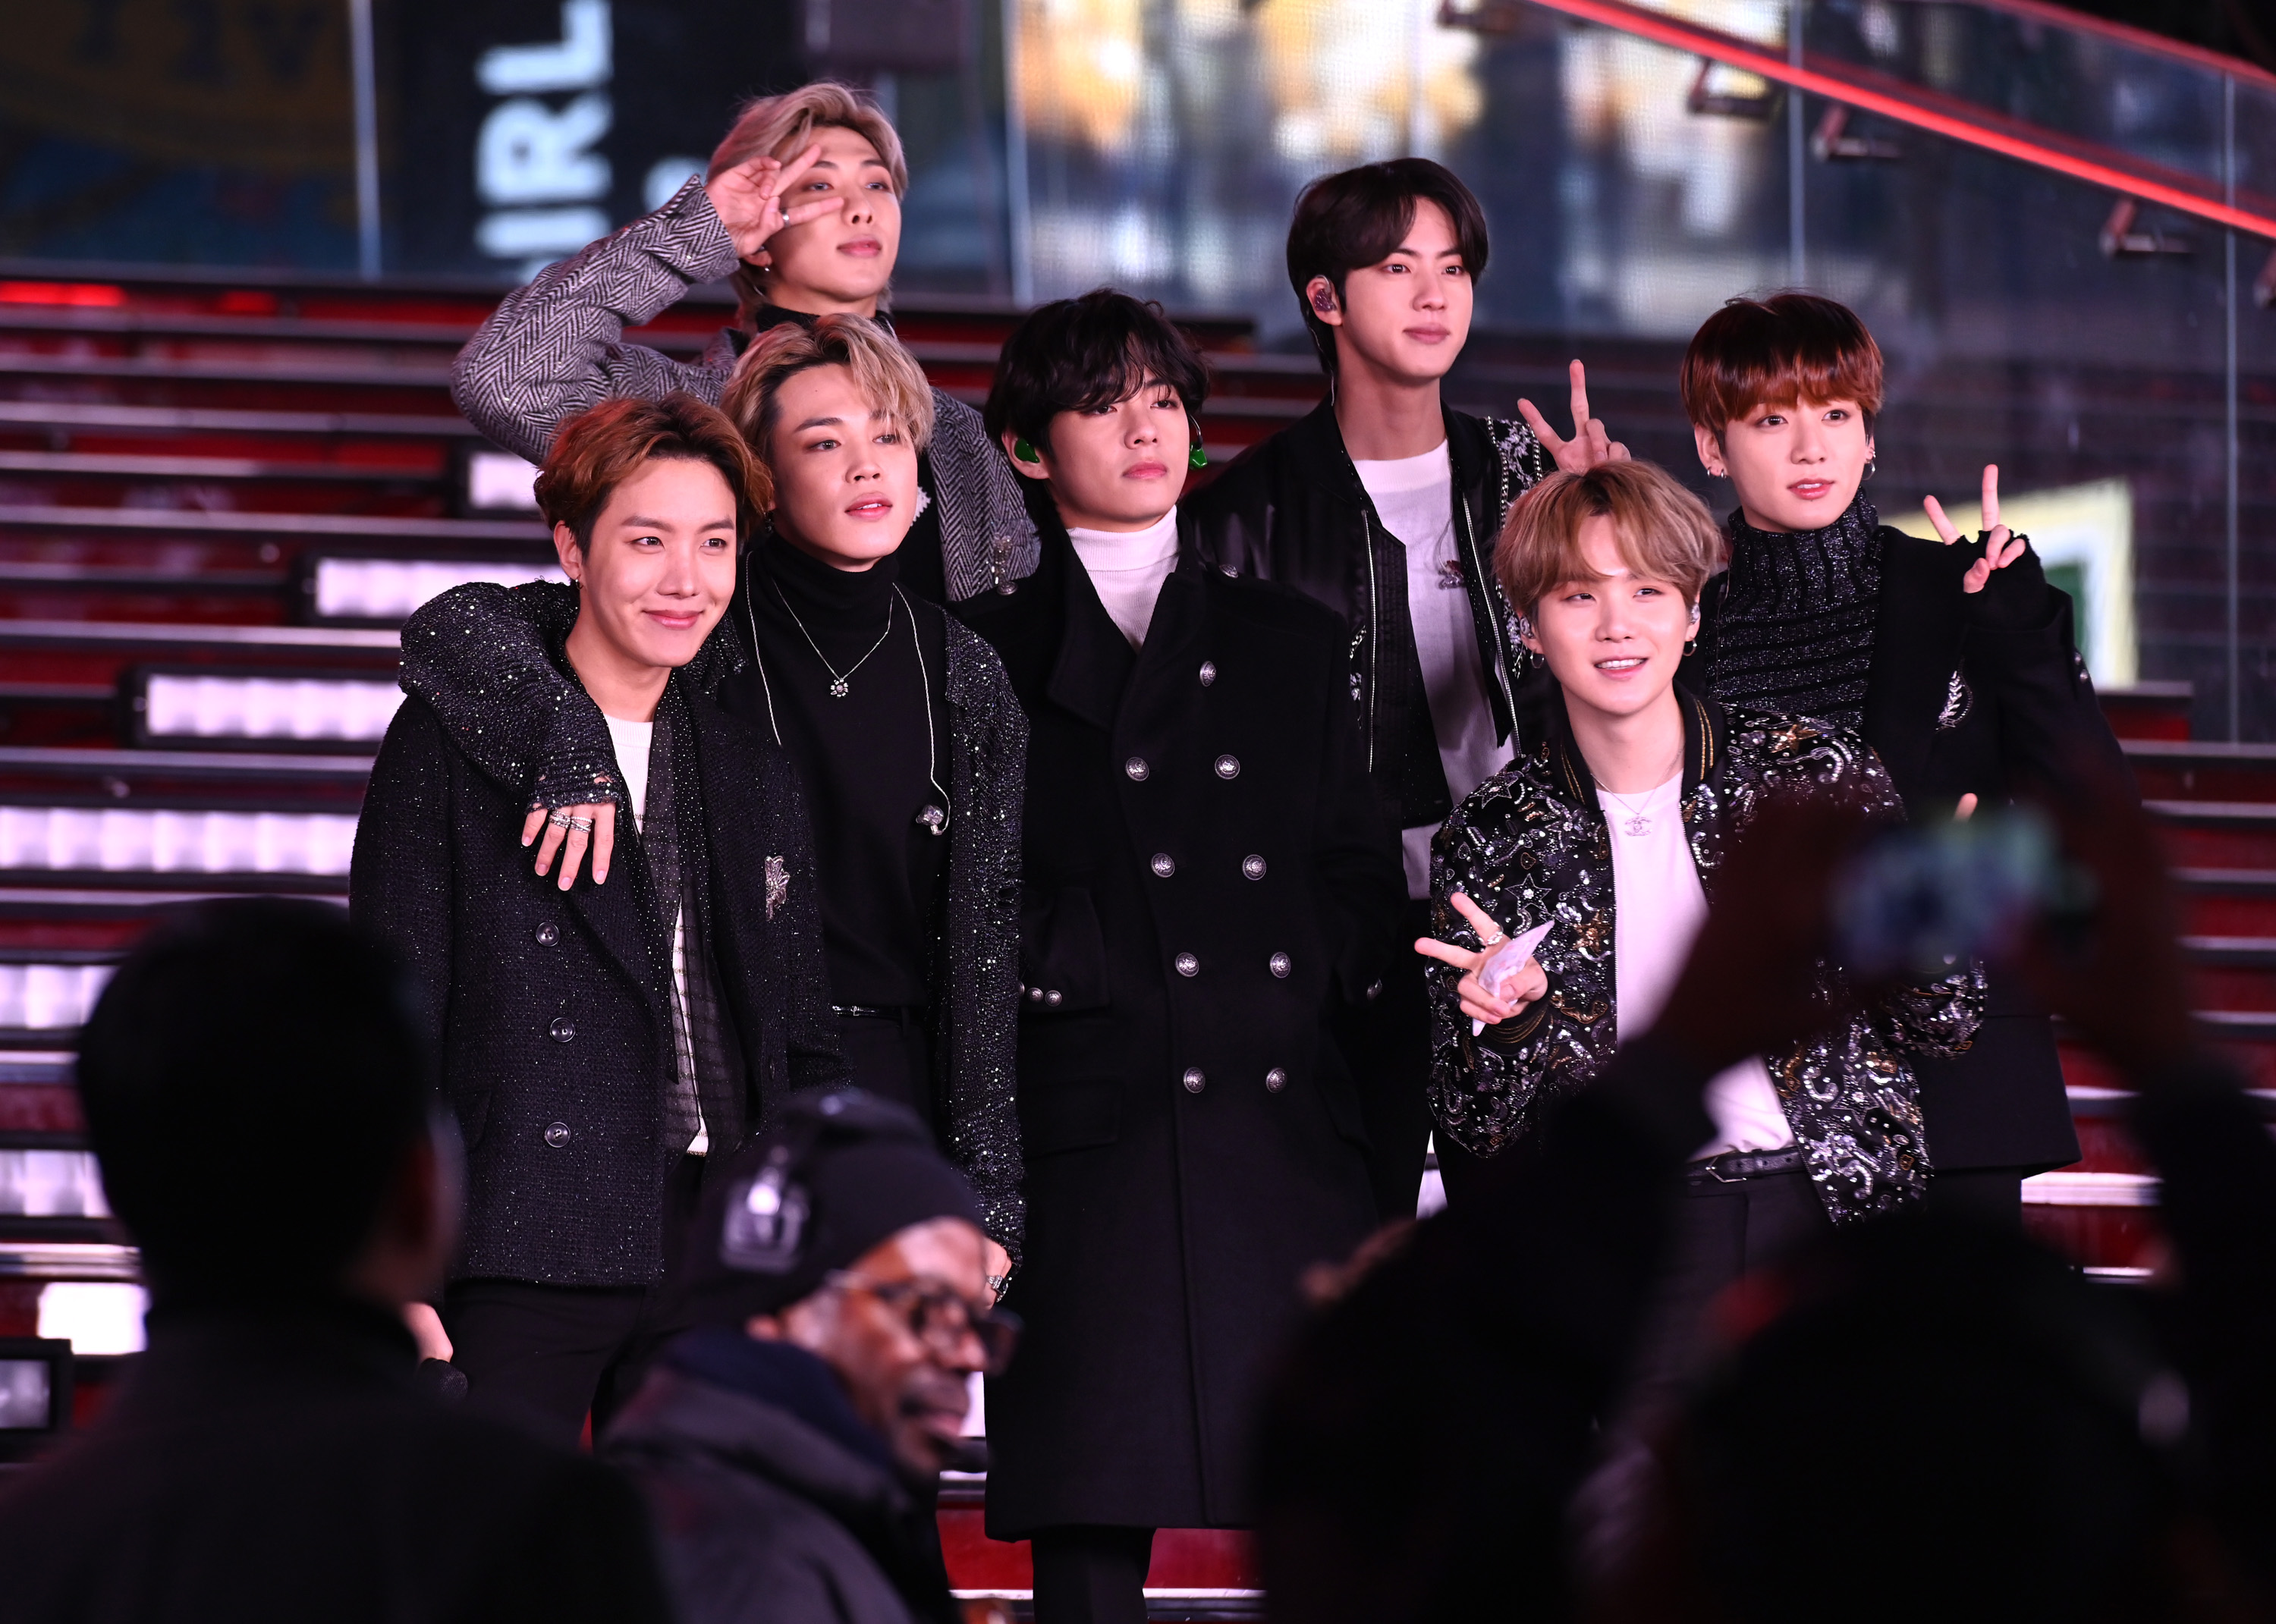 J-Hope, Jimin, RM, V, Jin, Suga, and Jungkook of BTS at Dick Clark's New Year's Rockin' Eve With Ryan Seacrest 2020